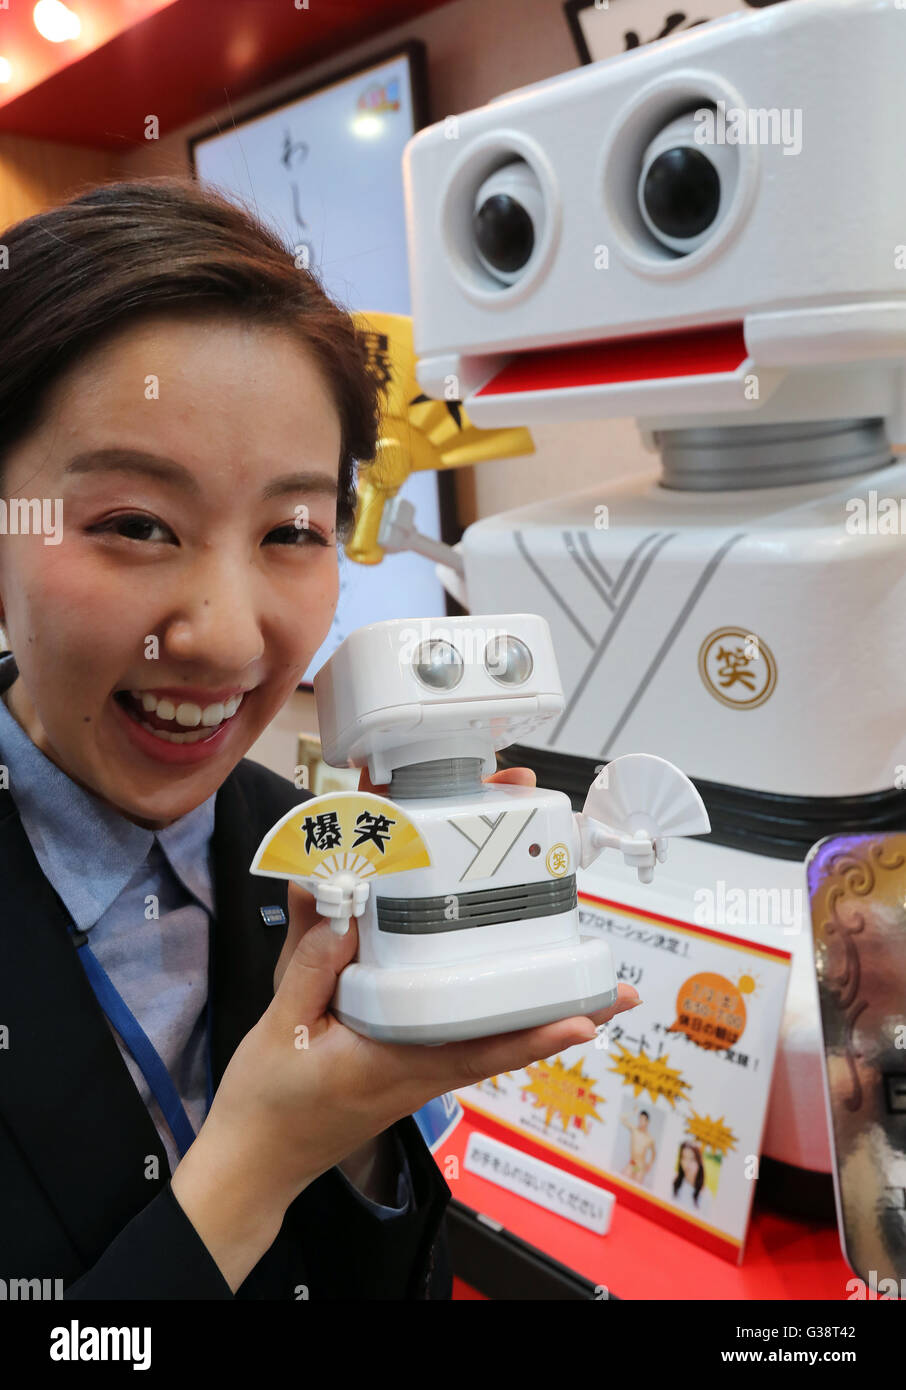 Tokyo, Japan. 9th June, 2016. An employee of Japanese toy maker Tomy displays a toy robot 'Baku Shotaro' which can toss off a total of 1,300 gags at the annual Tokyo Toy Show in Tokyo on Thursday, June 9, 2016. Some 160,000 people are expecting to visit the four-day toy trade show. © Yoshio Tsunoda/AFLO/Alamy Live News Stock Photo